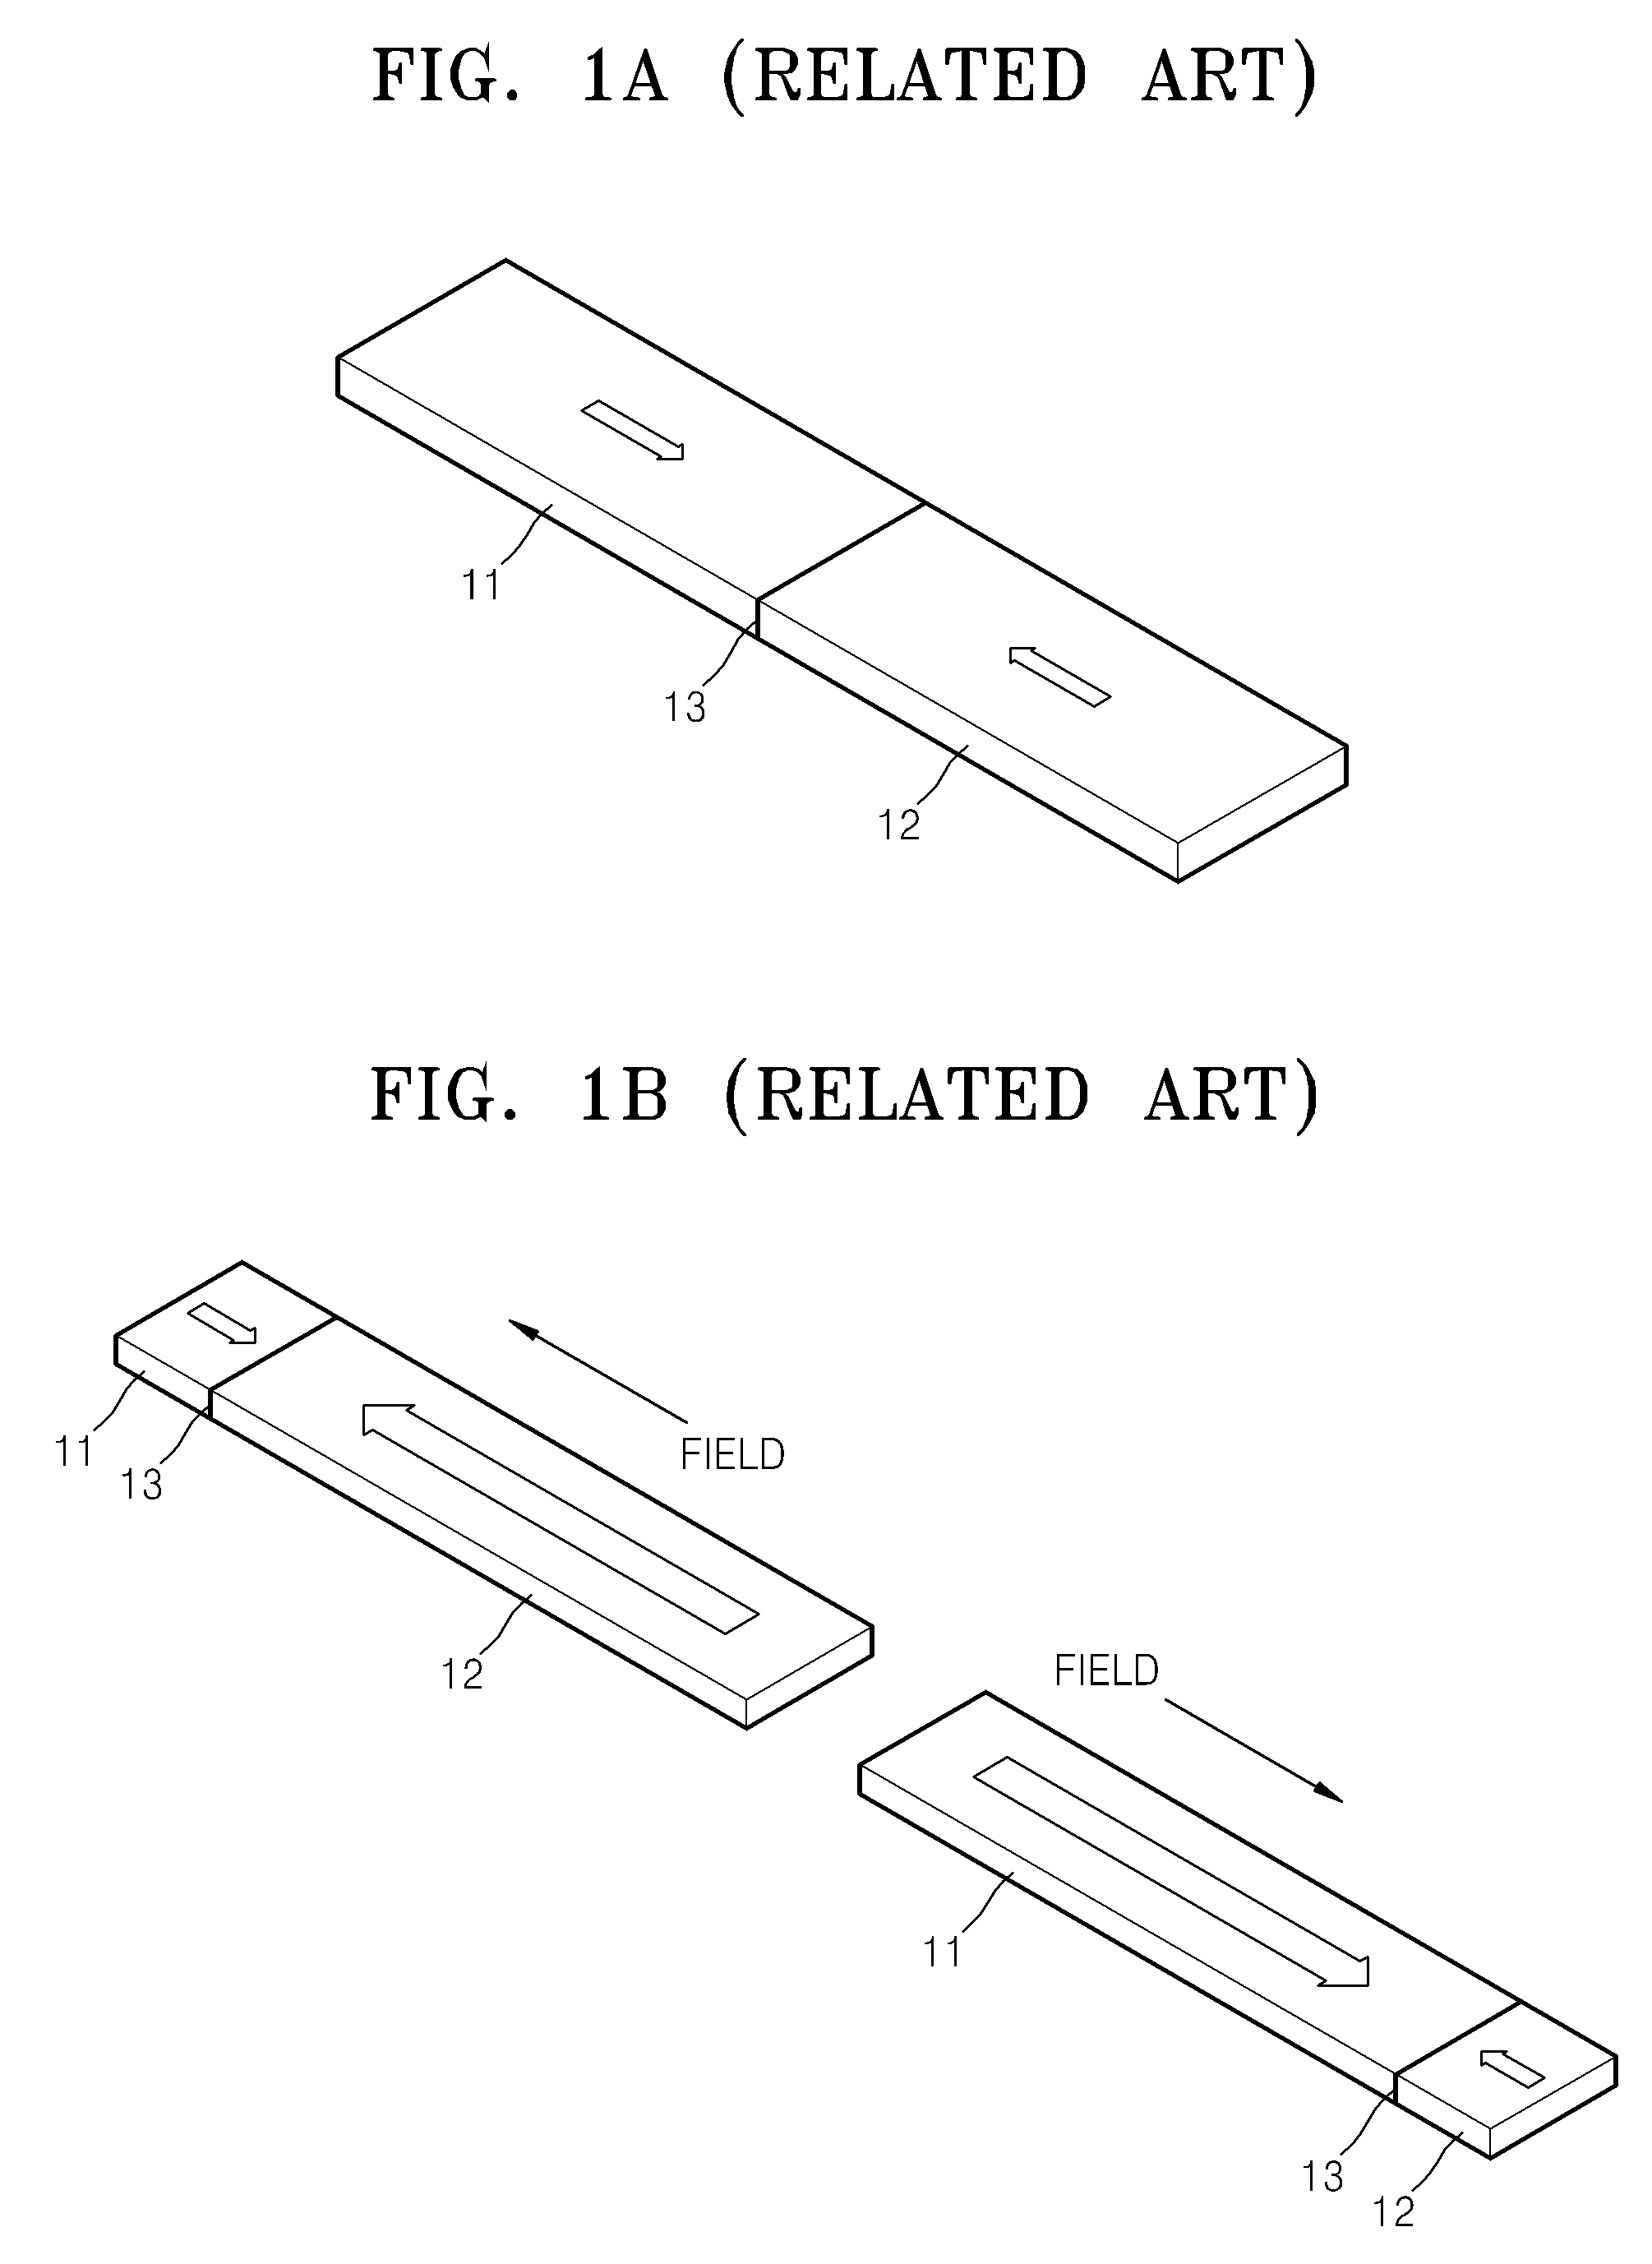 Memory device employing magnetic domain wall movement